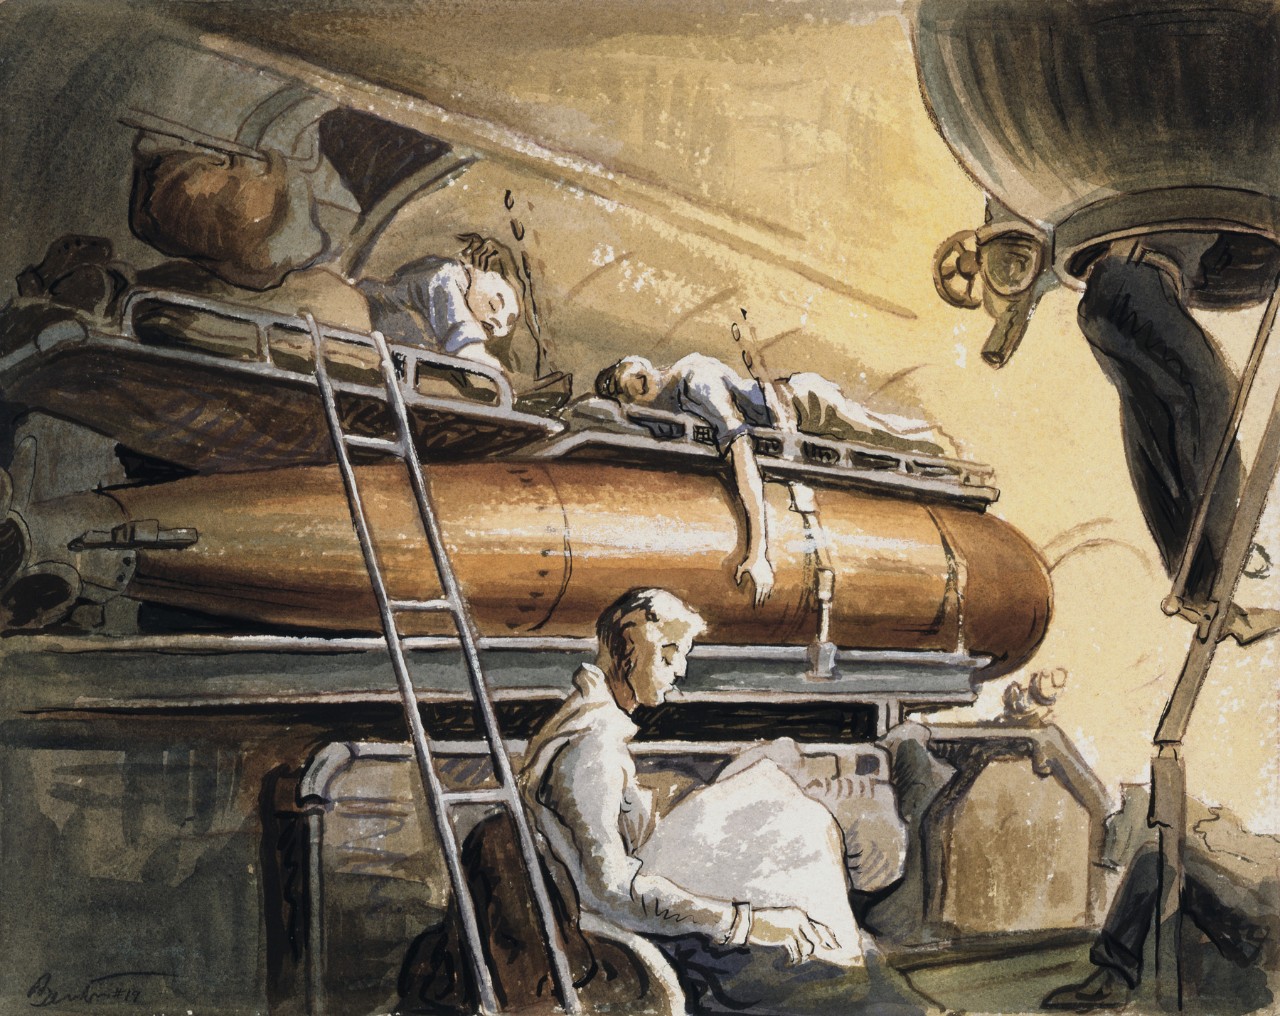 Men sleep on bunks atop torpedoes while another man reads a paper